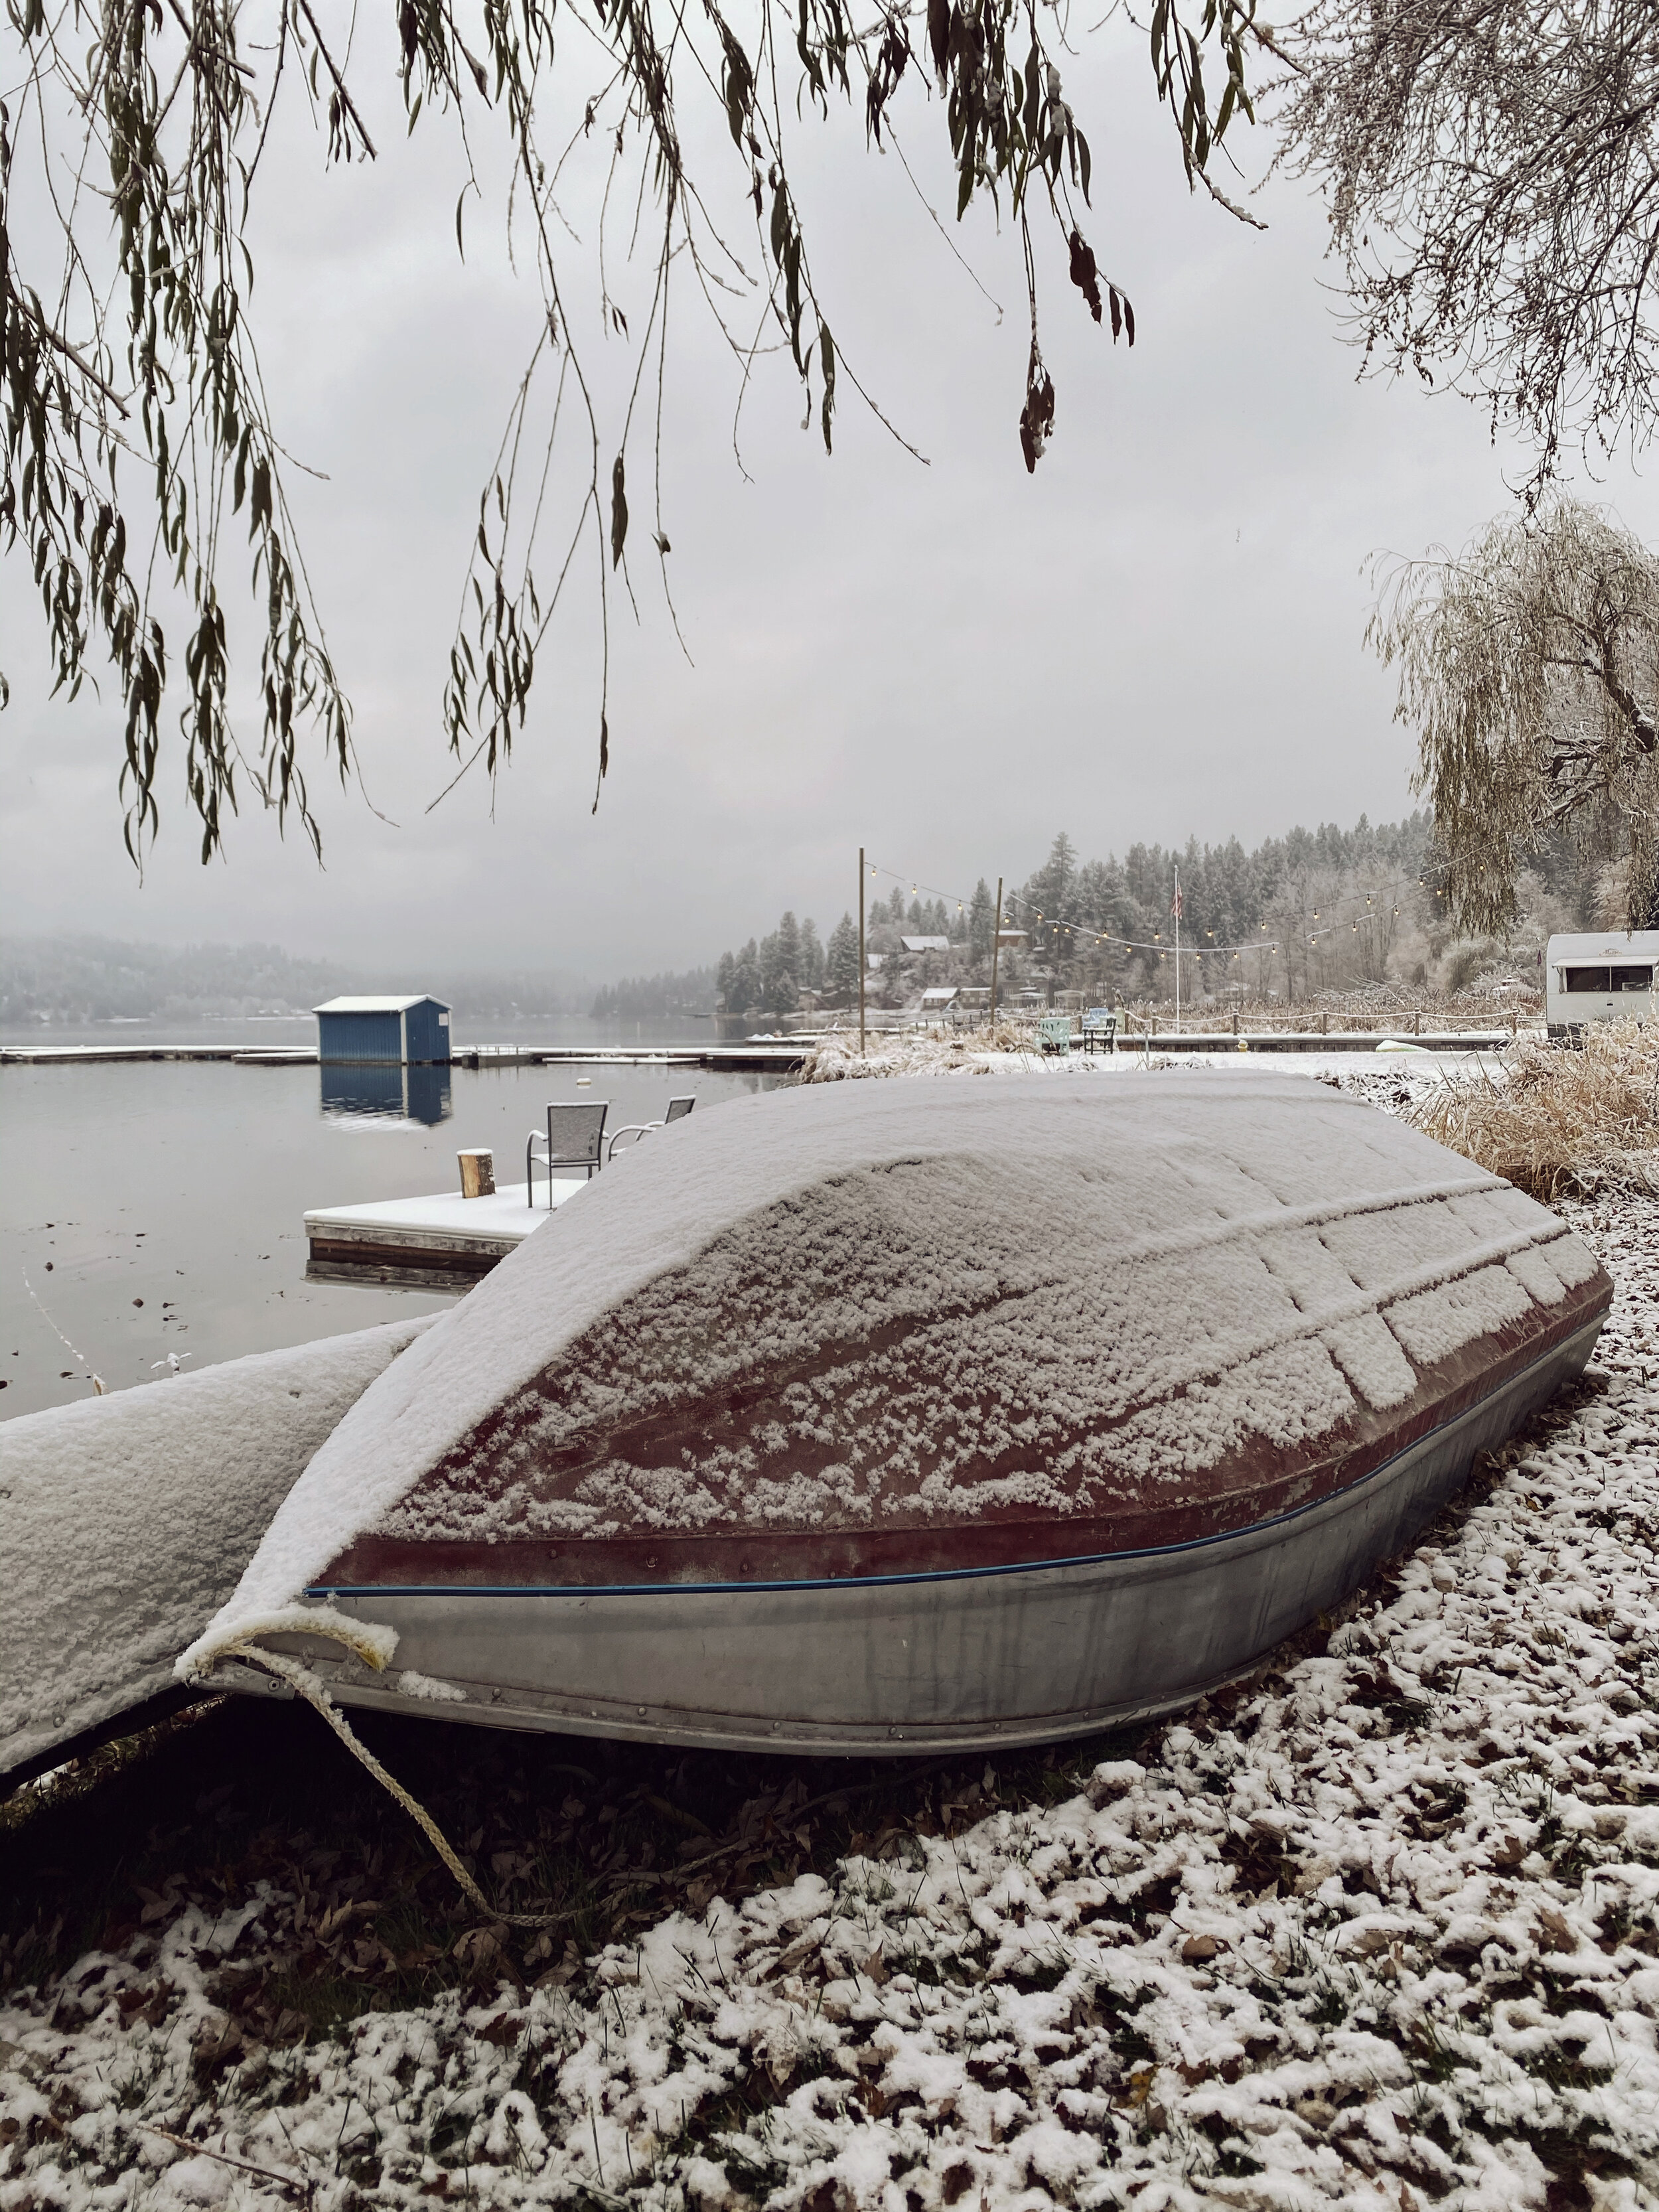 Fresh snow on Canoe and boat Newman Lake (Copy)